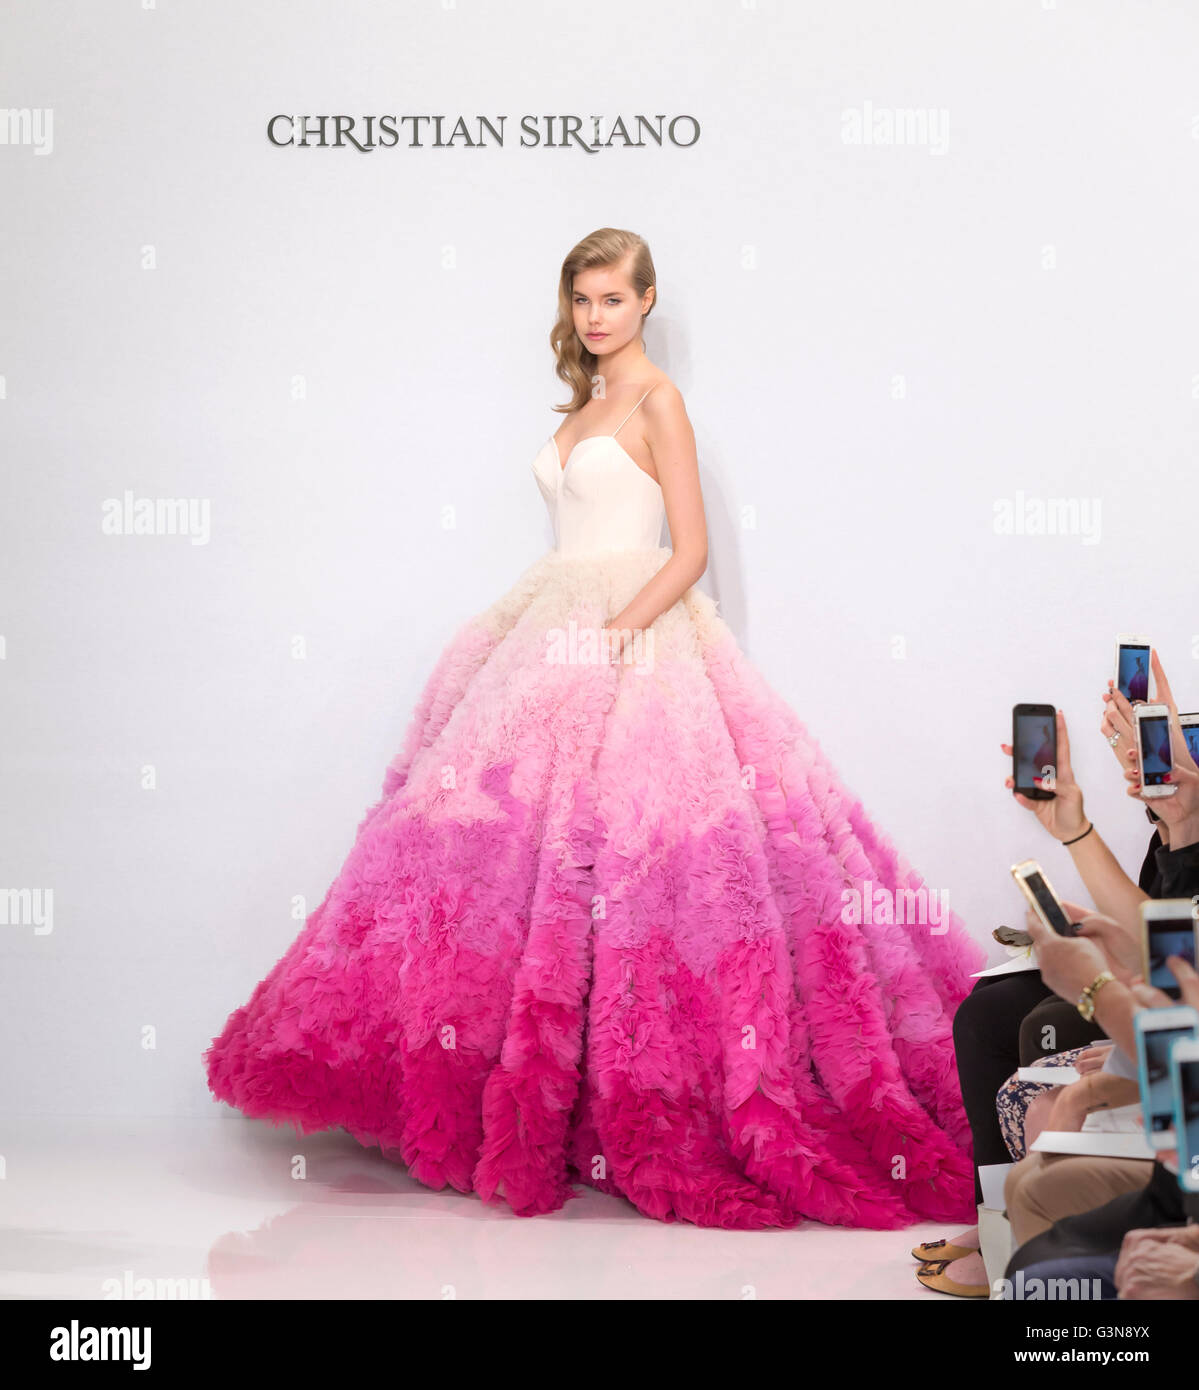 NEW YORK, NY - APRIL 18, 2016: A model walks the runway at the Christian Siriano For Kleinfeld S/S 2017 Bridal Collection Stock Photo